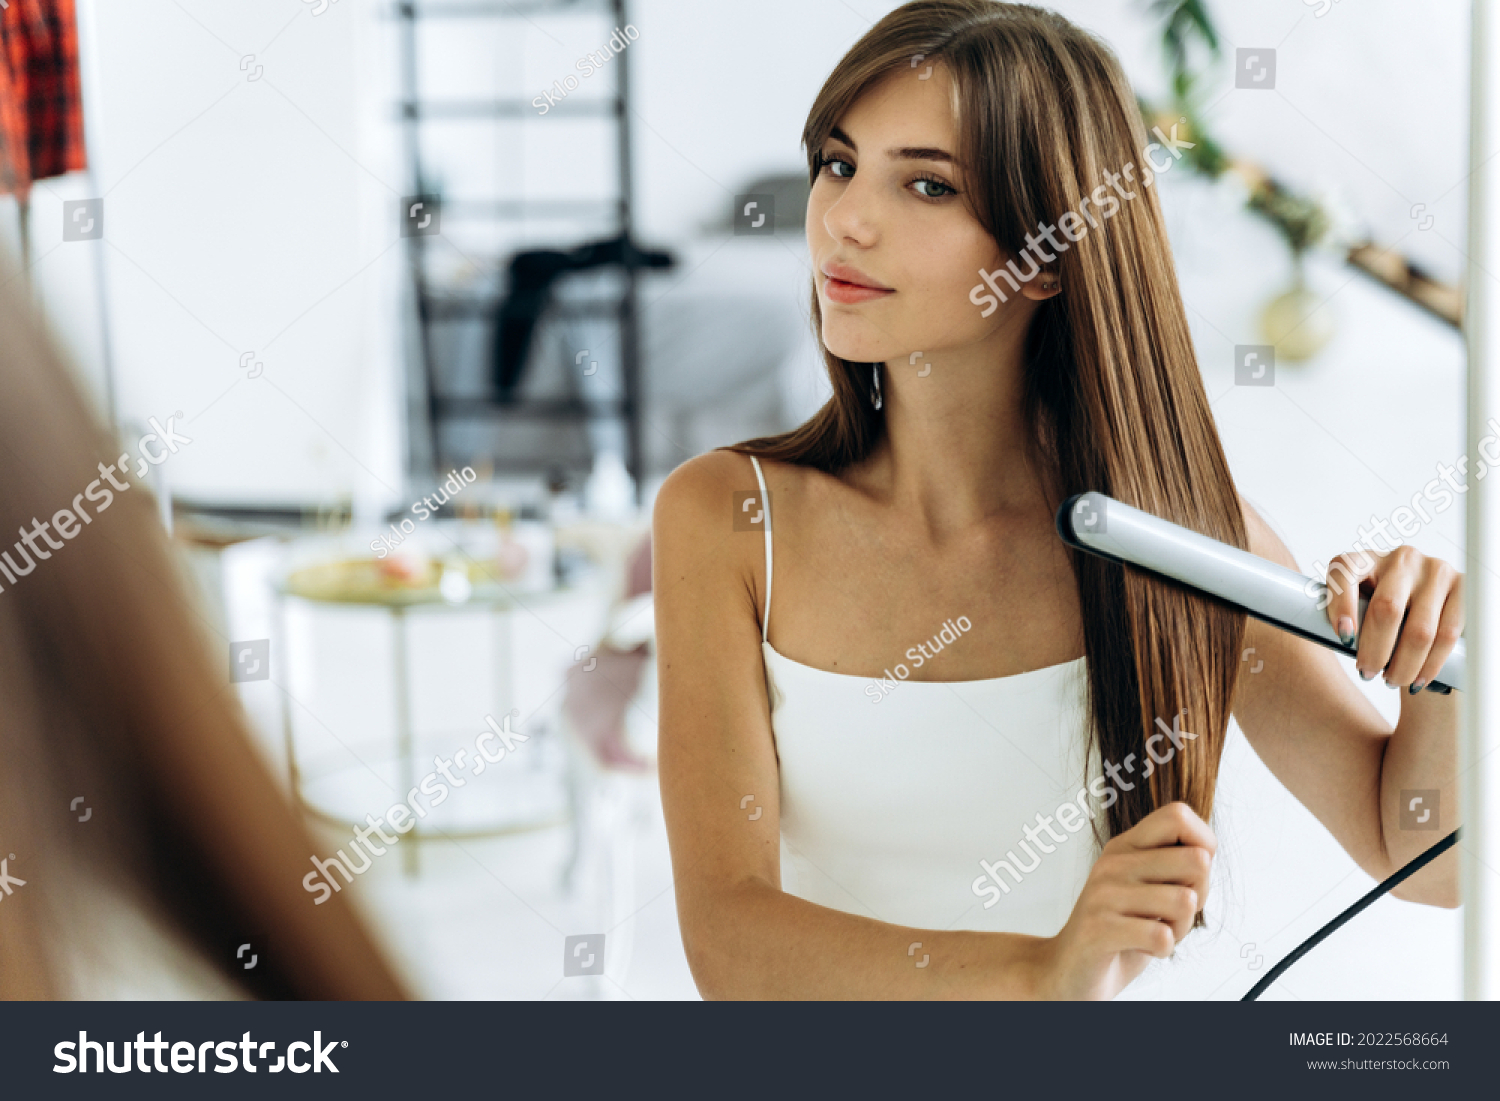 Beautiful young smiling woman using a hair straightener while looking into the mirror in bathroom. Confident girl looking at her reflection with pleasure smile  #2022568664